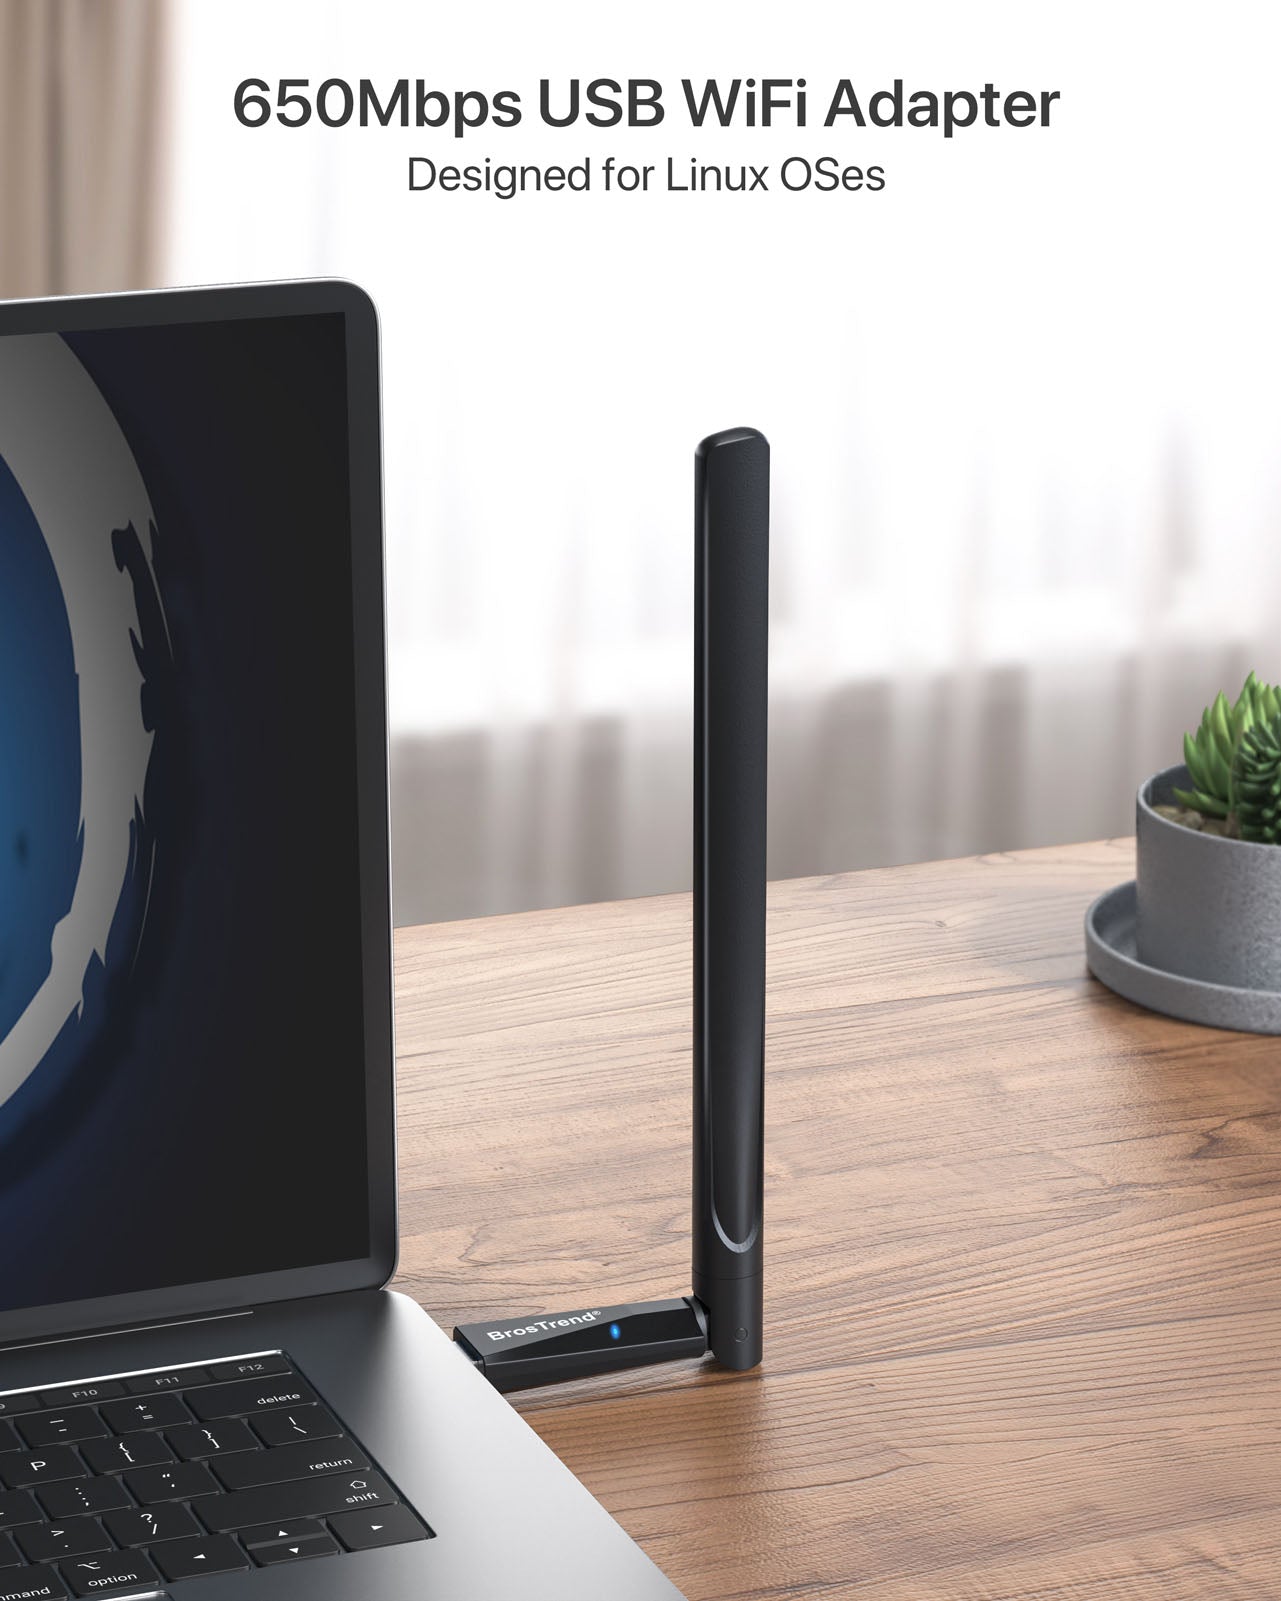 BrosTrend 650Mbps Linux Compatible USB WiFi Adapter Works on a Linux Laptop PC and Delivers Dual Band AC650 WiFi Stable and Fast for Streaming and Download